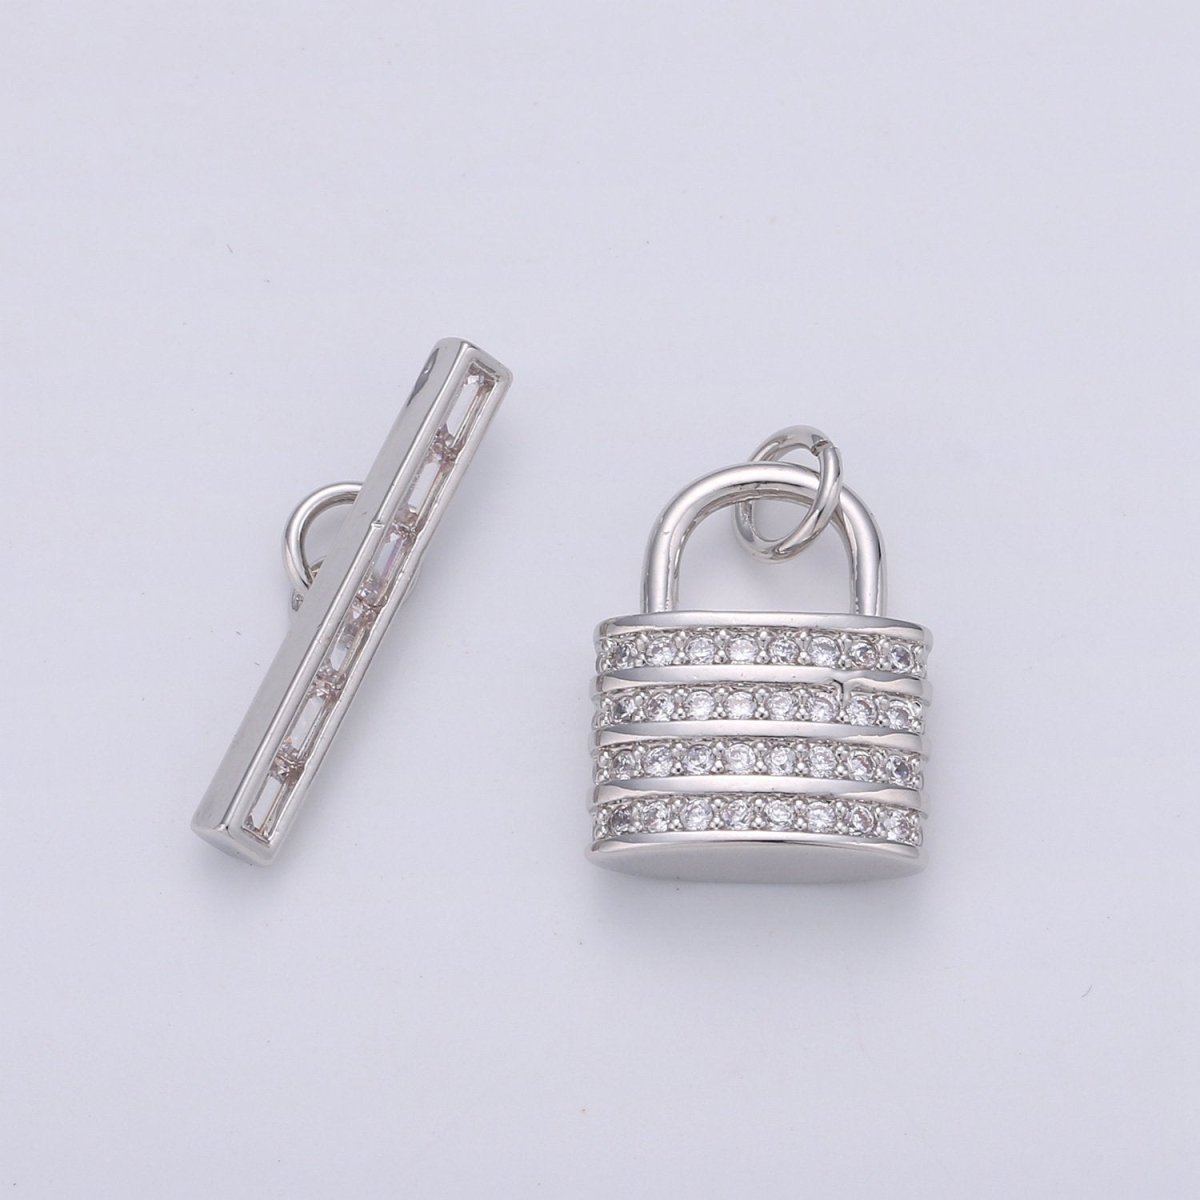 Micro Pave CZ Toggle Clasps, T-Bar, Clasp Connector, Padlock Toggle Clasp, Silver Toggle Clasps Rose Gold Cubic Clasp Jewelry Making, K-526 K-527 - DLUXCA